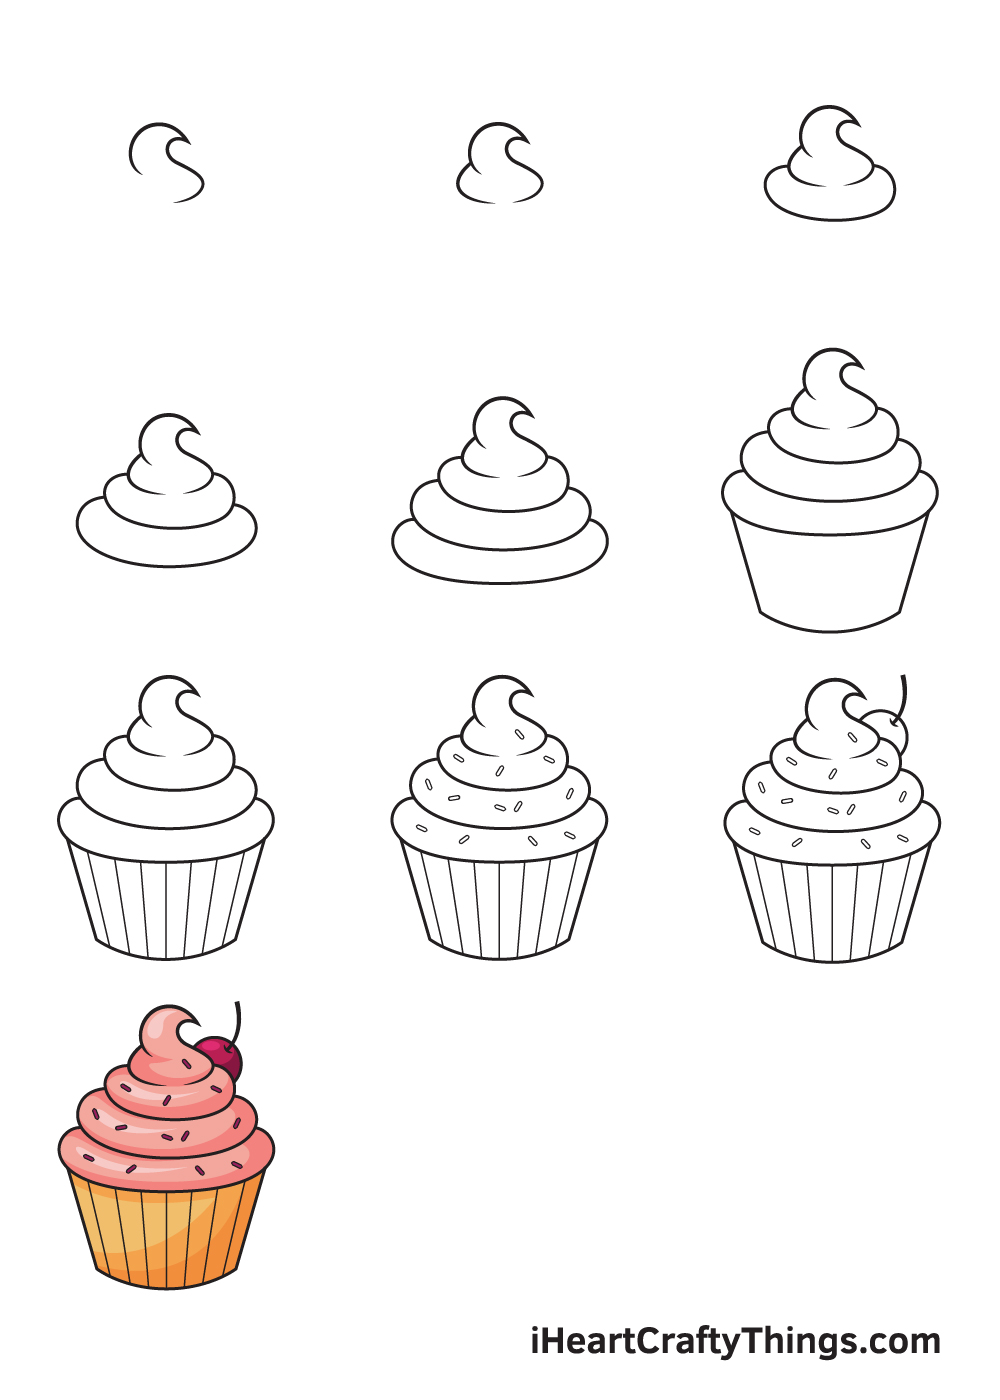 How to Draw a Cupcake - Easy Drawing Art